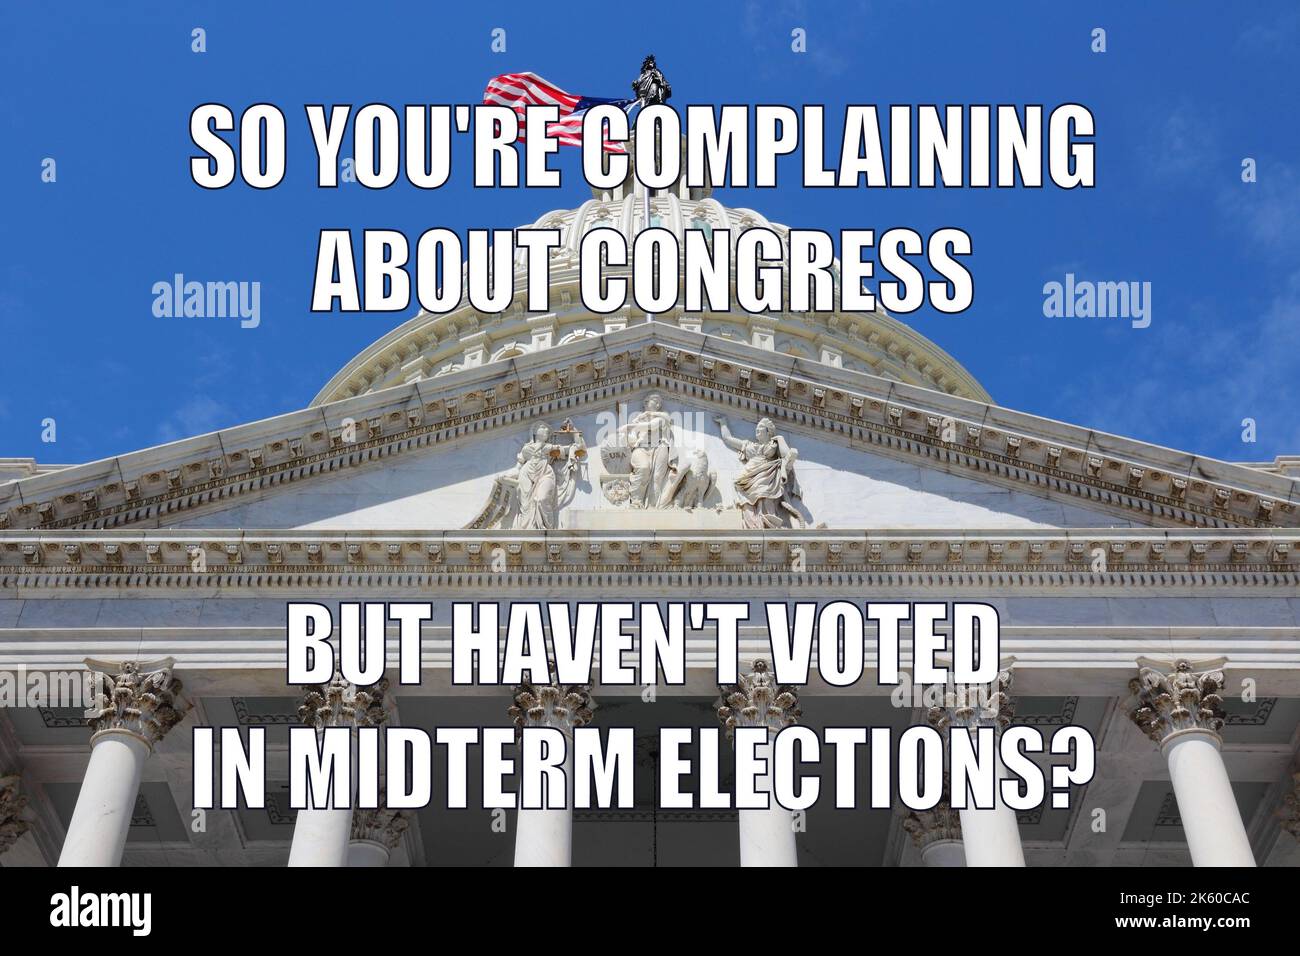 USA political system funny meme for social media sharing. Humor about US midterm elections and congress dissatisfaction by non voters. Stock Photo